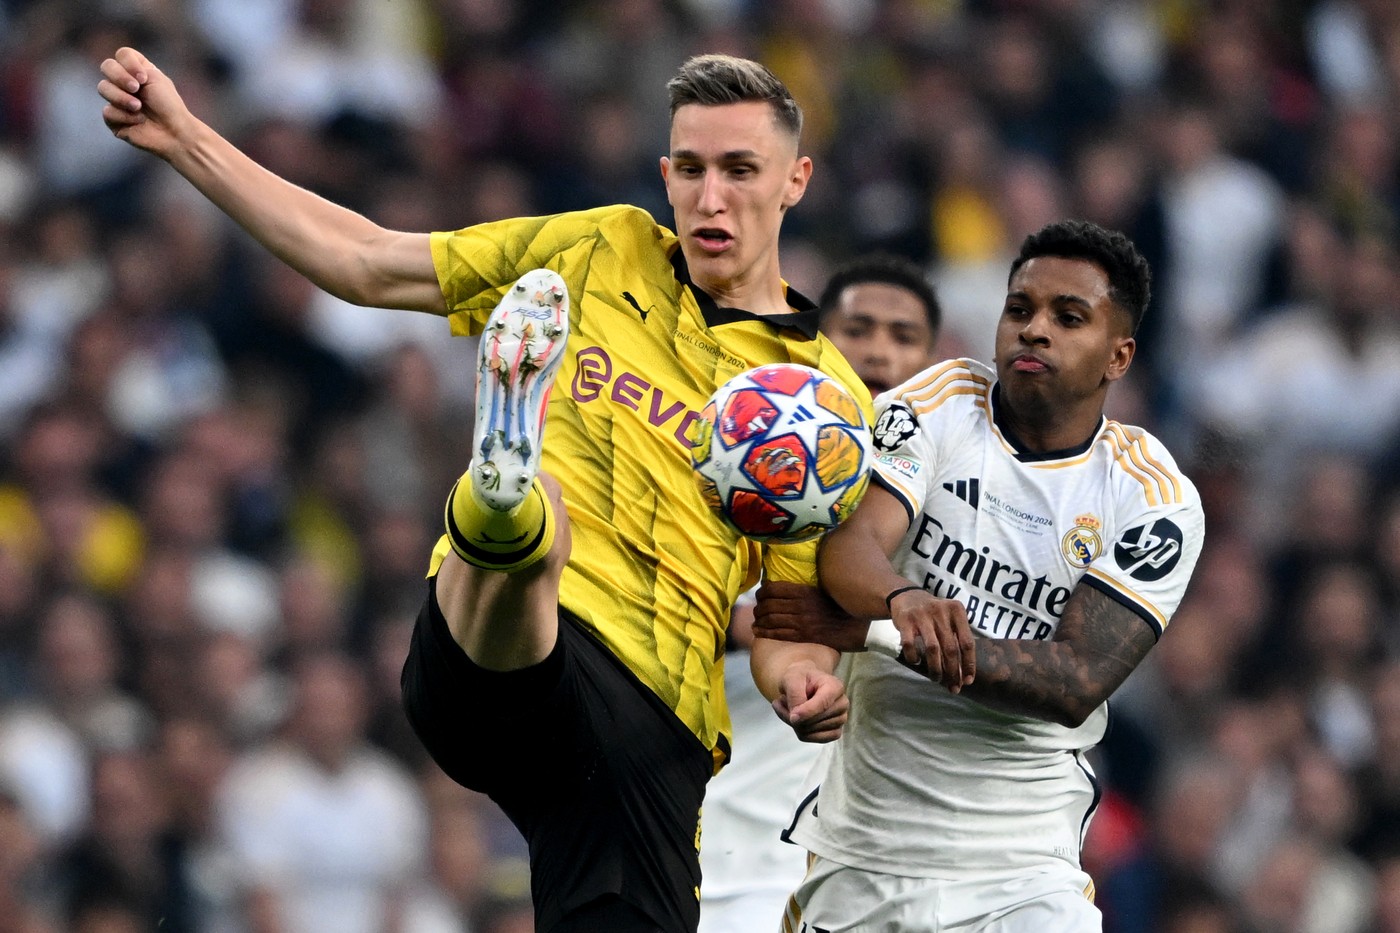 01 June 2024, Great Britain, London: Soccer: Champions League, Borussia Dortmund - Real Madrid, Final, Wembley Stadium, Madrid's Rodrygo (r) and Dortmund's Nico Schlotterbeck fight for the ball.,Image: 878172057, License: Rights-managed, Restrictions: , Model Release: no